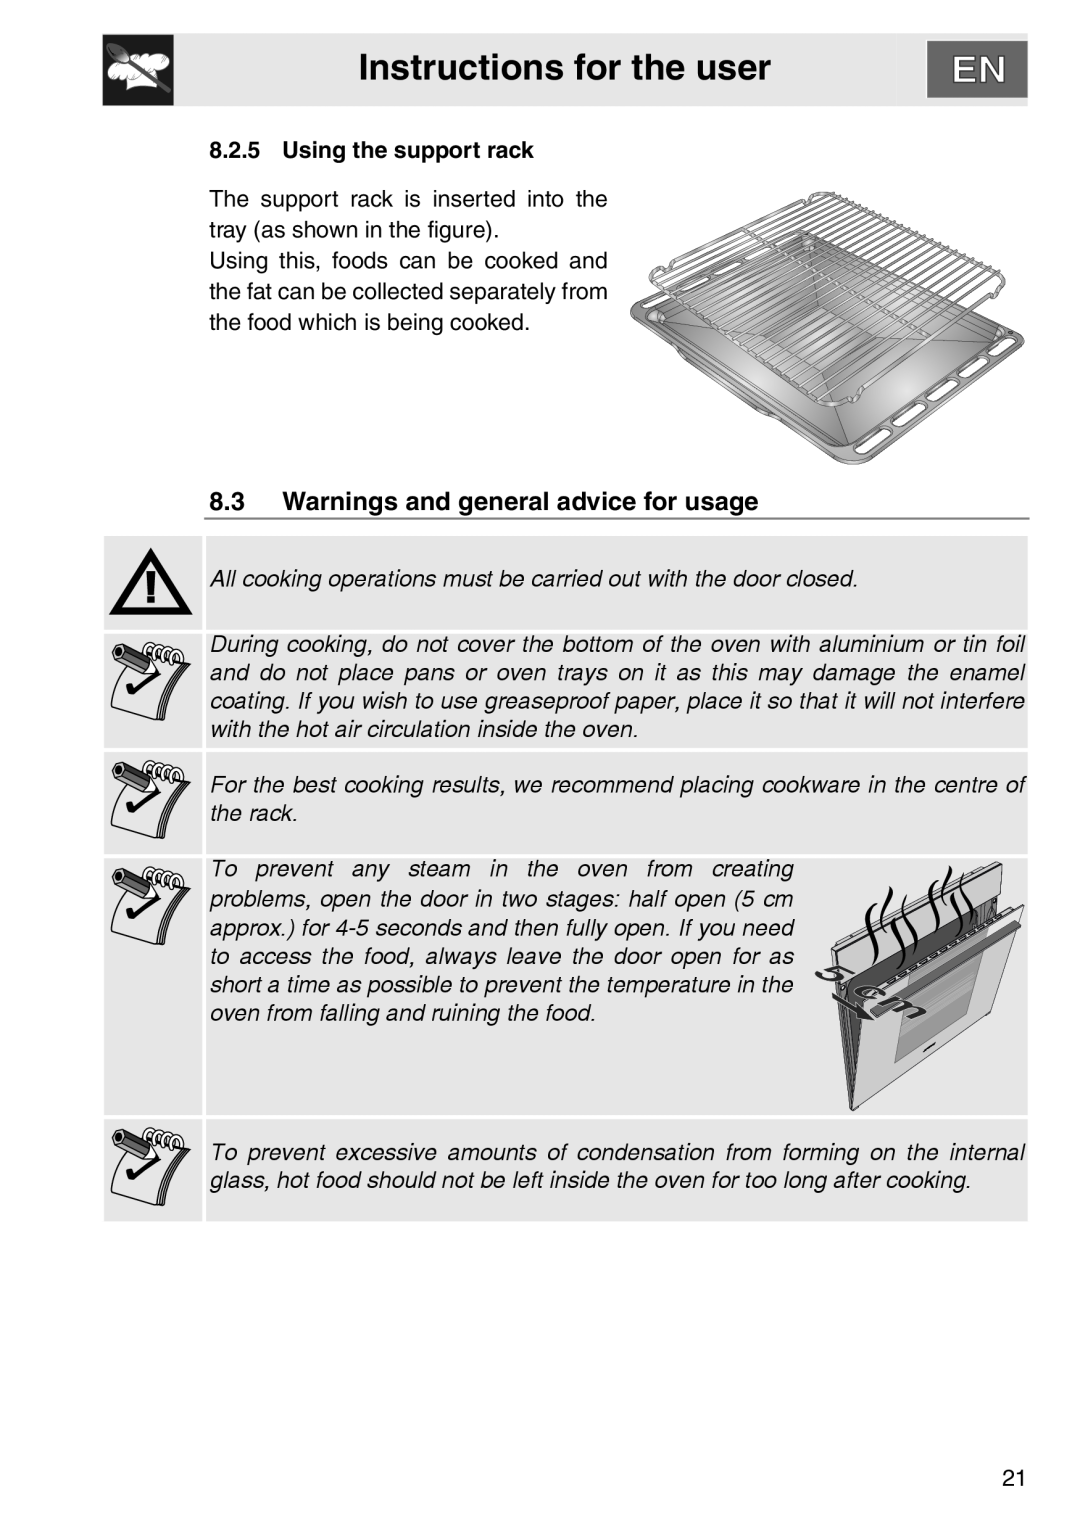 Smeg DOSCA36X-8, smeg Double Oven Warnings and general advice for usage, Using the support rack, Instructions for the user 